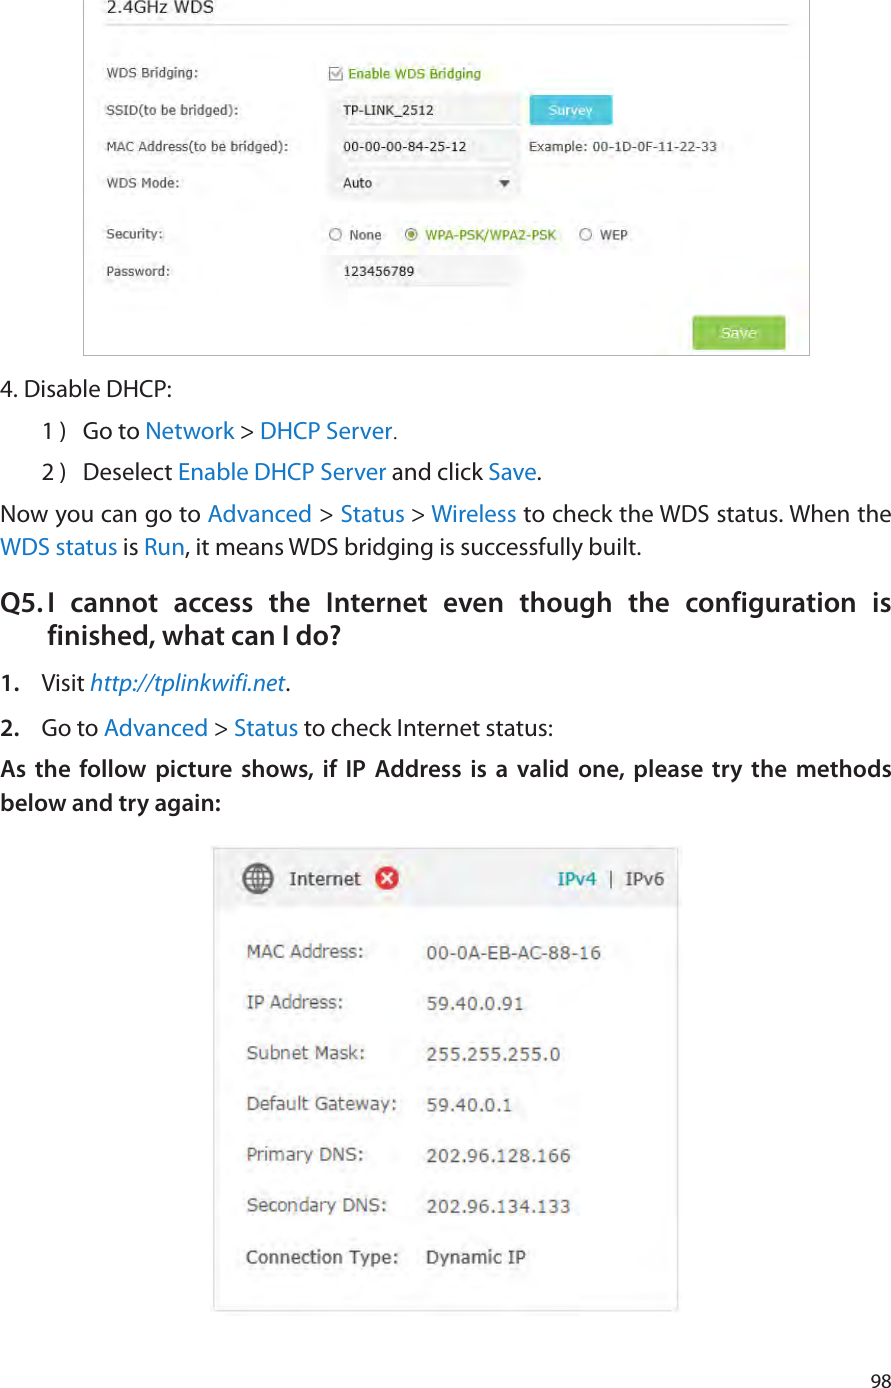 984. Disable DHCP:1 )  Go to Network &gt; DHCP Server.2 )  Deselect Enable DHCP Server and click Save.Now you can go to Advanced &gt; Status &gt; Wireless to check the WDS status. When the WDS status is Run, it means WDS bridging is successfully built.Q5. I cannot access the Internet even though the configuration is finished, what can I do?1.  Visit http://tplinkwifi.net.2.  Go to Advanced &gt; Status to check Internet status:As the follow picture shows, if IP Address is a valid one, please try the methods below and try again: